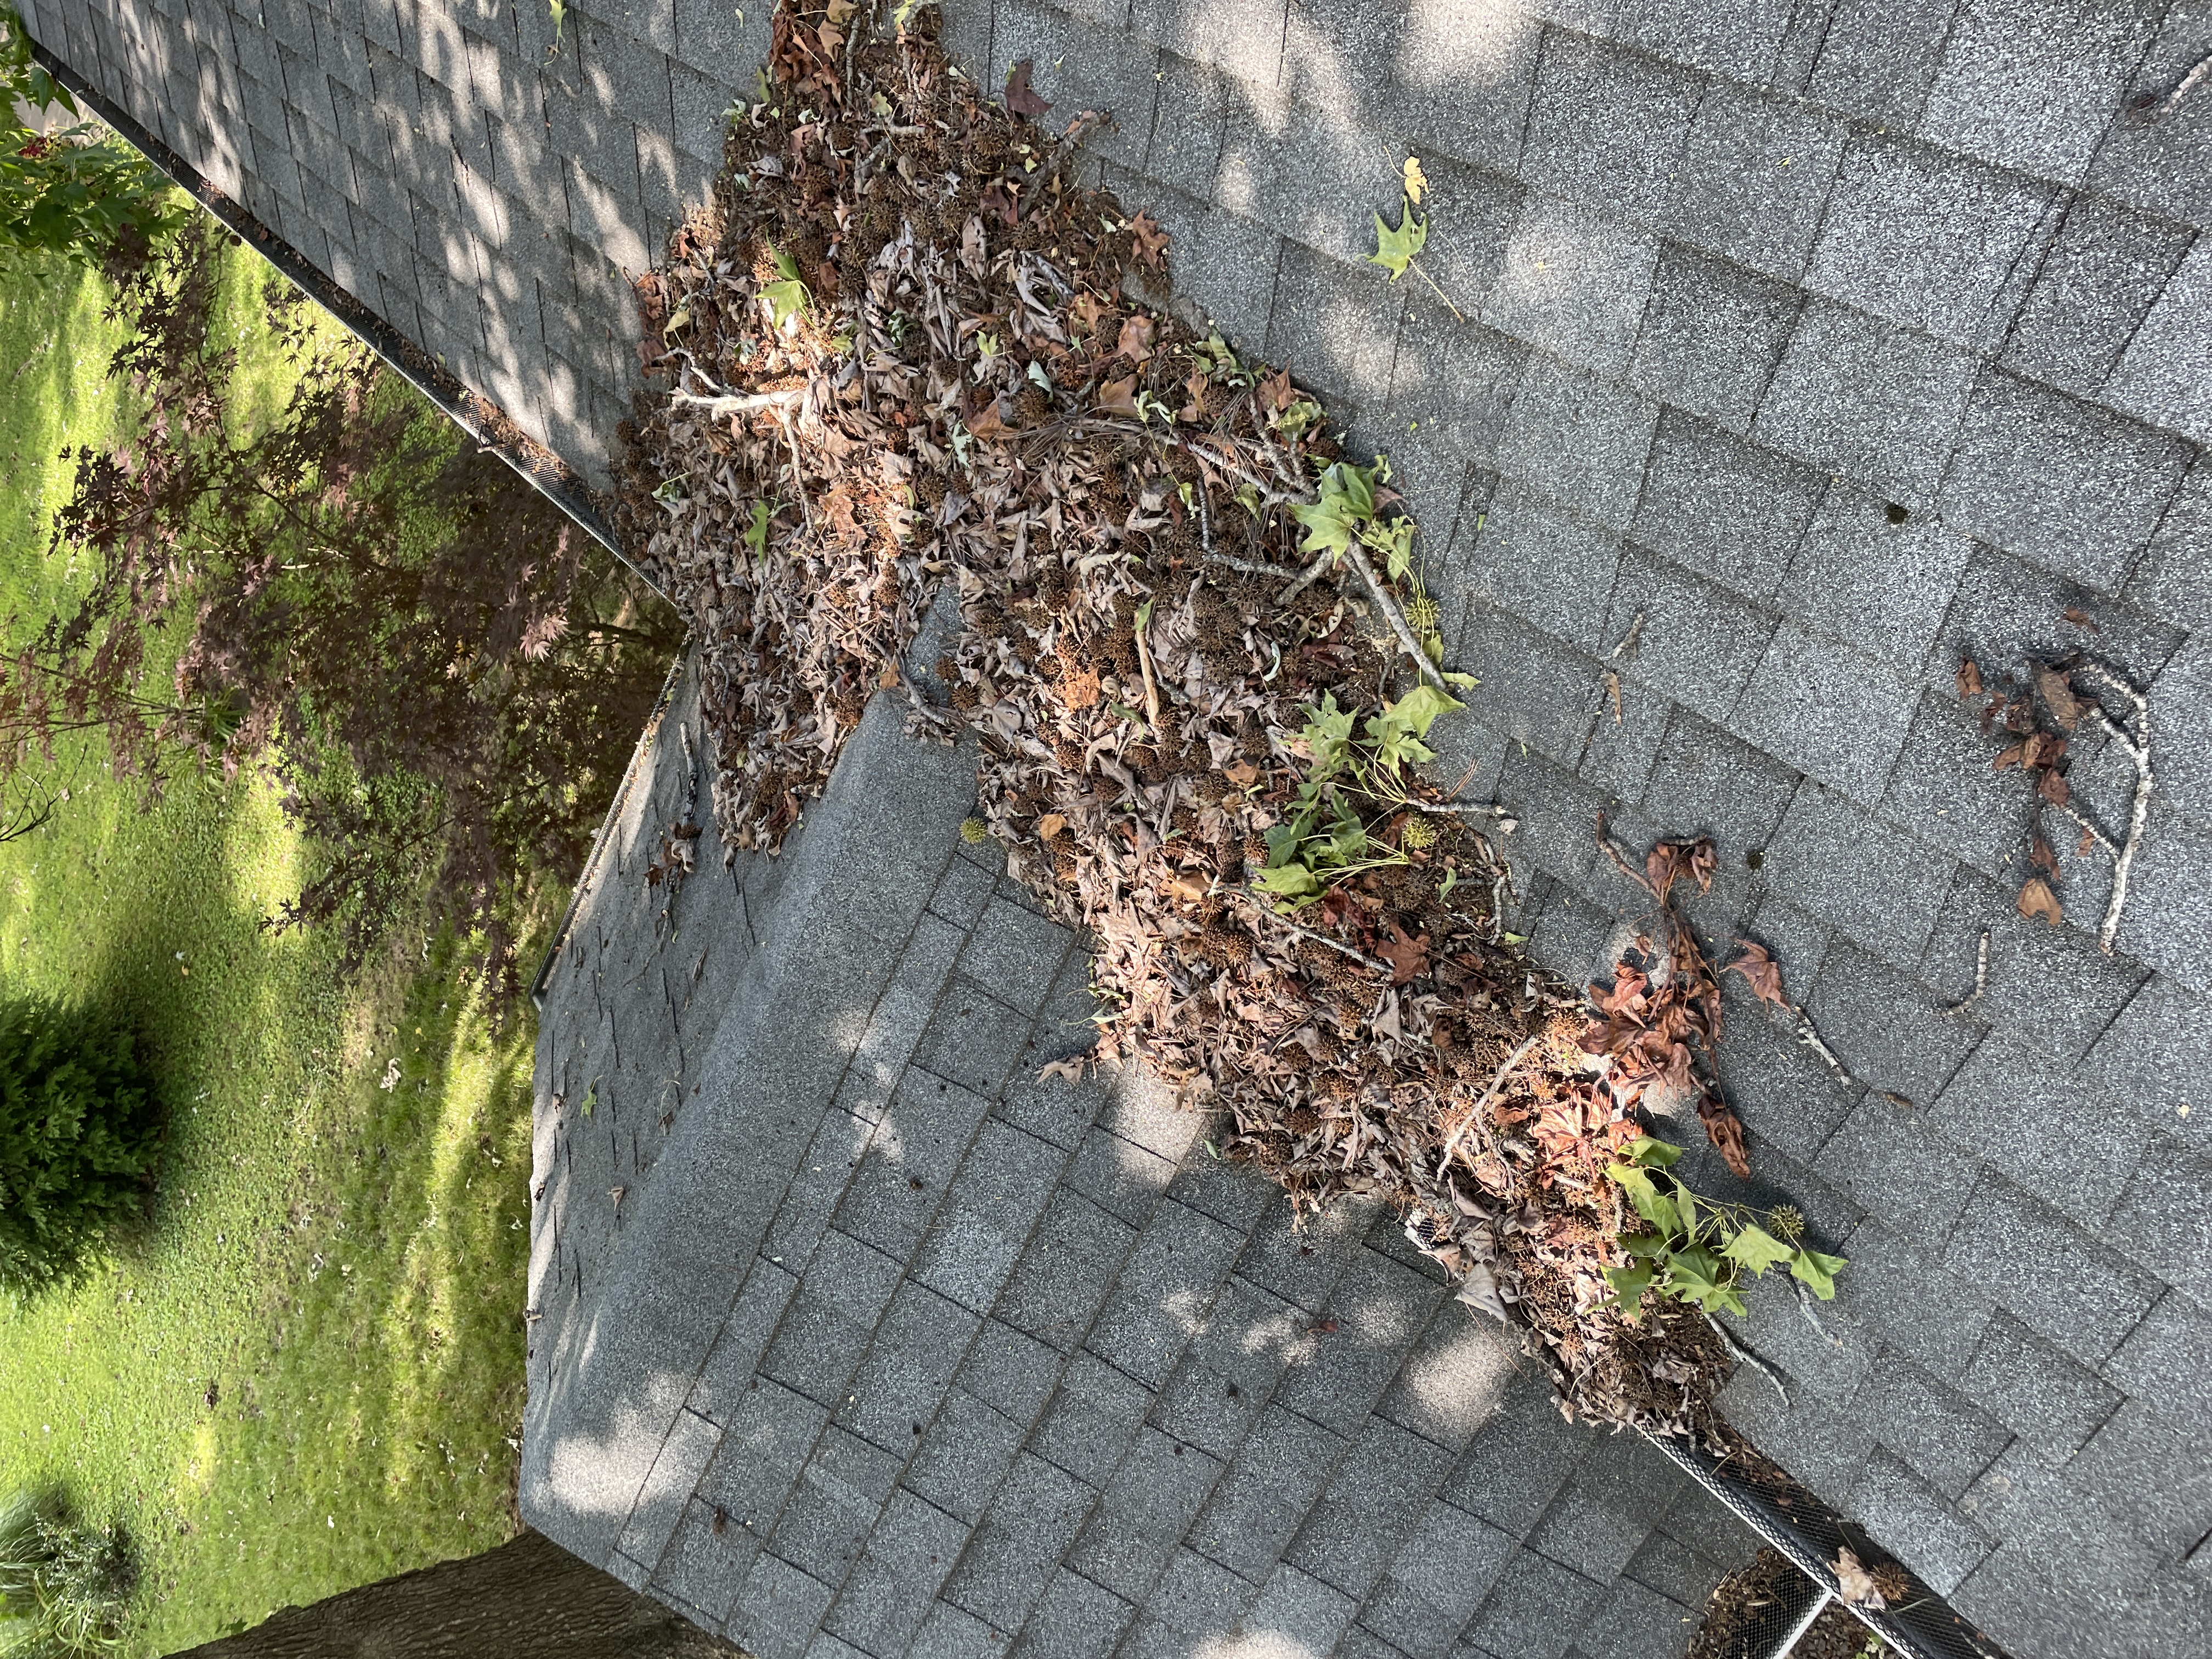 Roof and gutter debris cleaning in Belleville IL